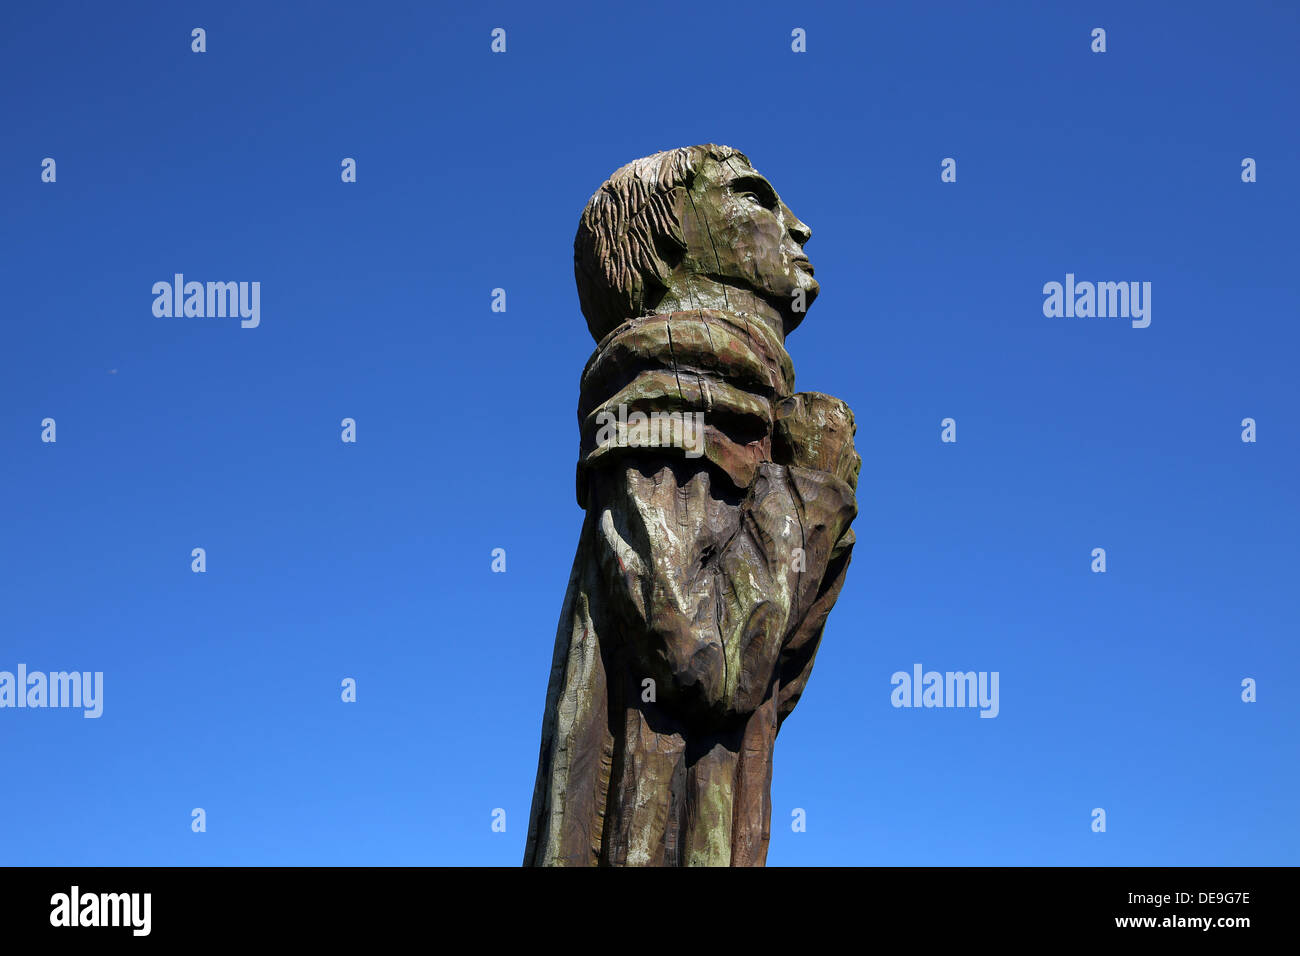 Detail from a carved sculpture of Wat Tyler, by Robert Koenig, at the Wat Tyler Country Park in Pitsea, near Basildon, Essex Stock Photo